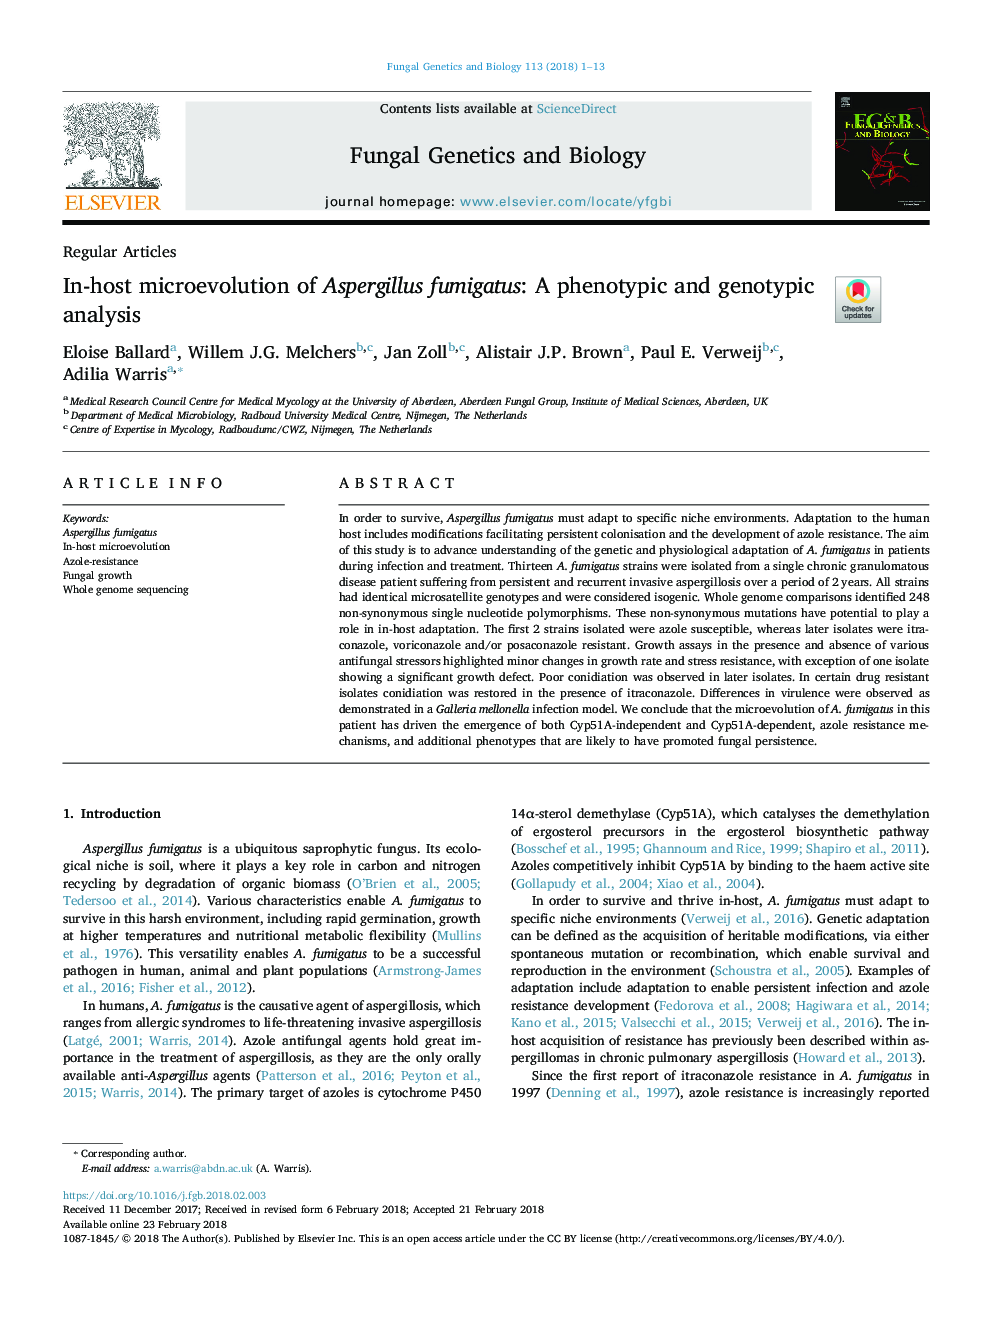 In-host microevolution of Aspergillus fumigatus: A phenotypic and genotypic analysis